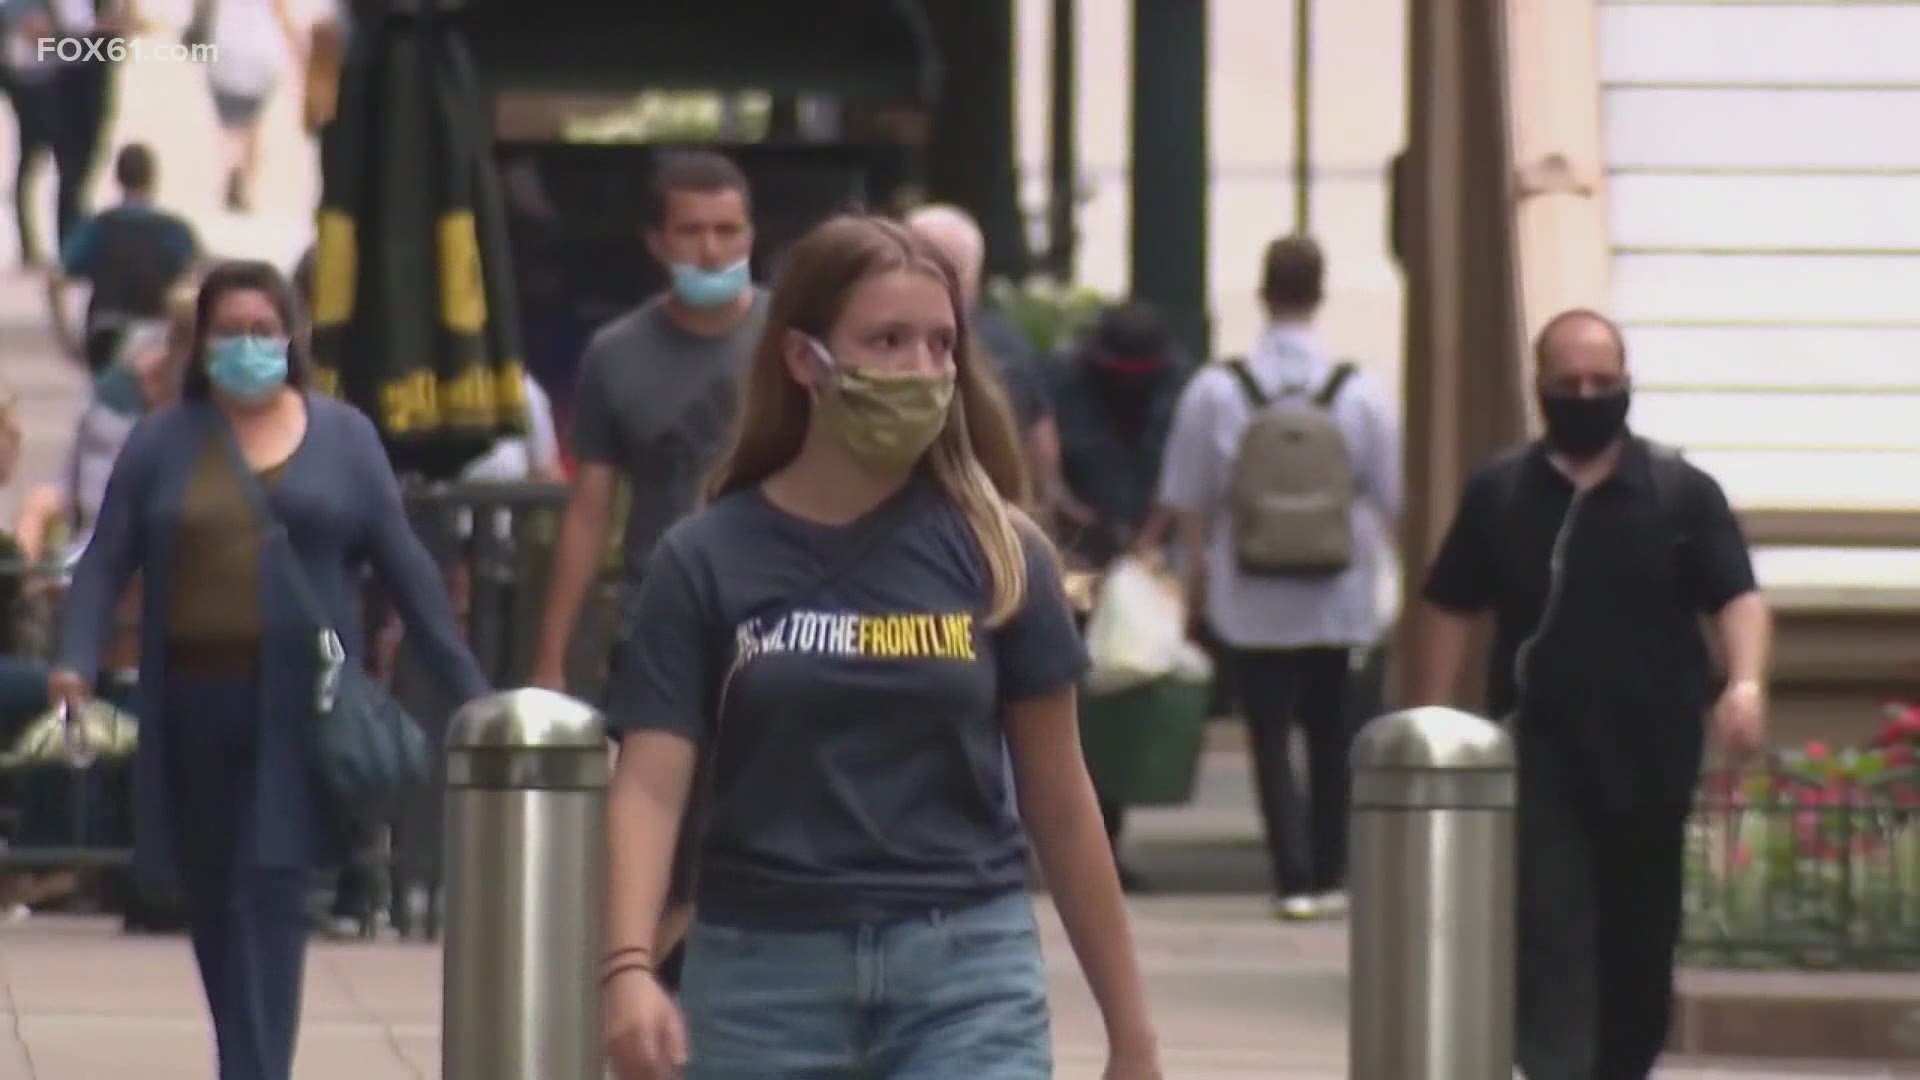 Recently, Gov. Lamont announced that all mandates outside of face masks will be lifted on May 19.